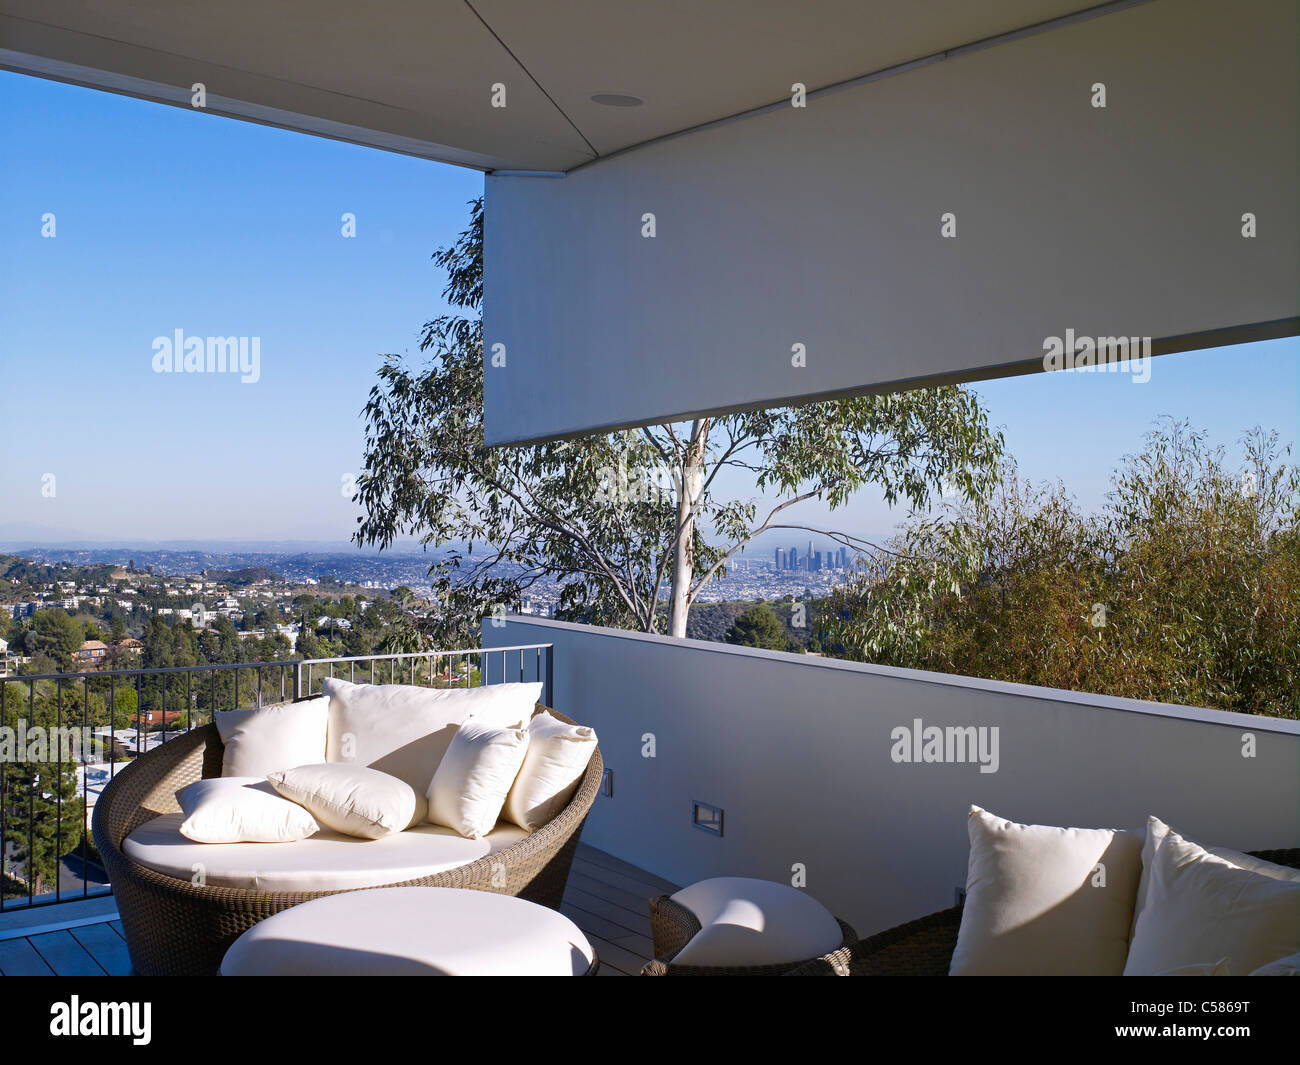 Balcony with views over the plain. Outdoor furnishings with white cushions. Stock Photo